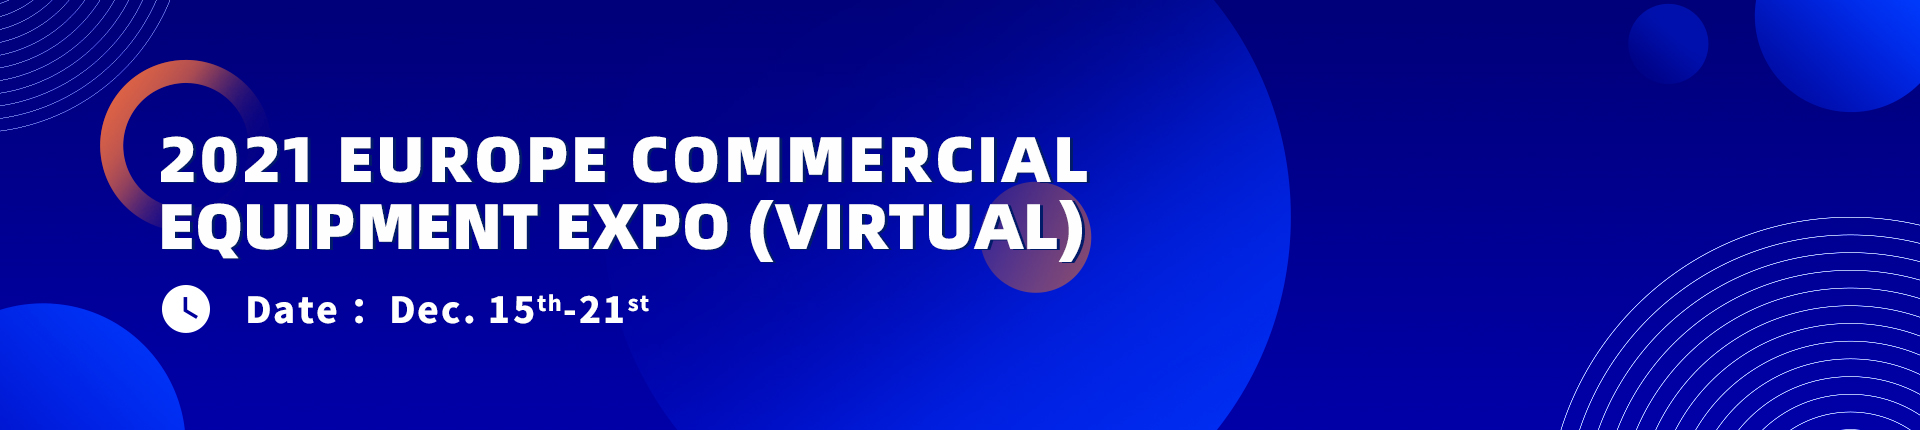 2021 Europe Commercial Equipment Expo (Virtual)